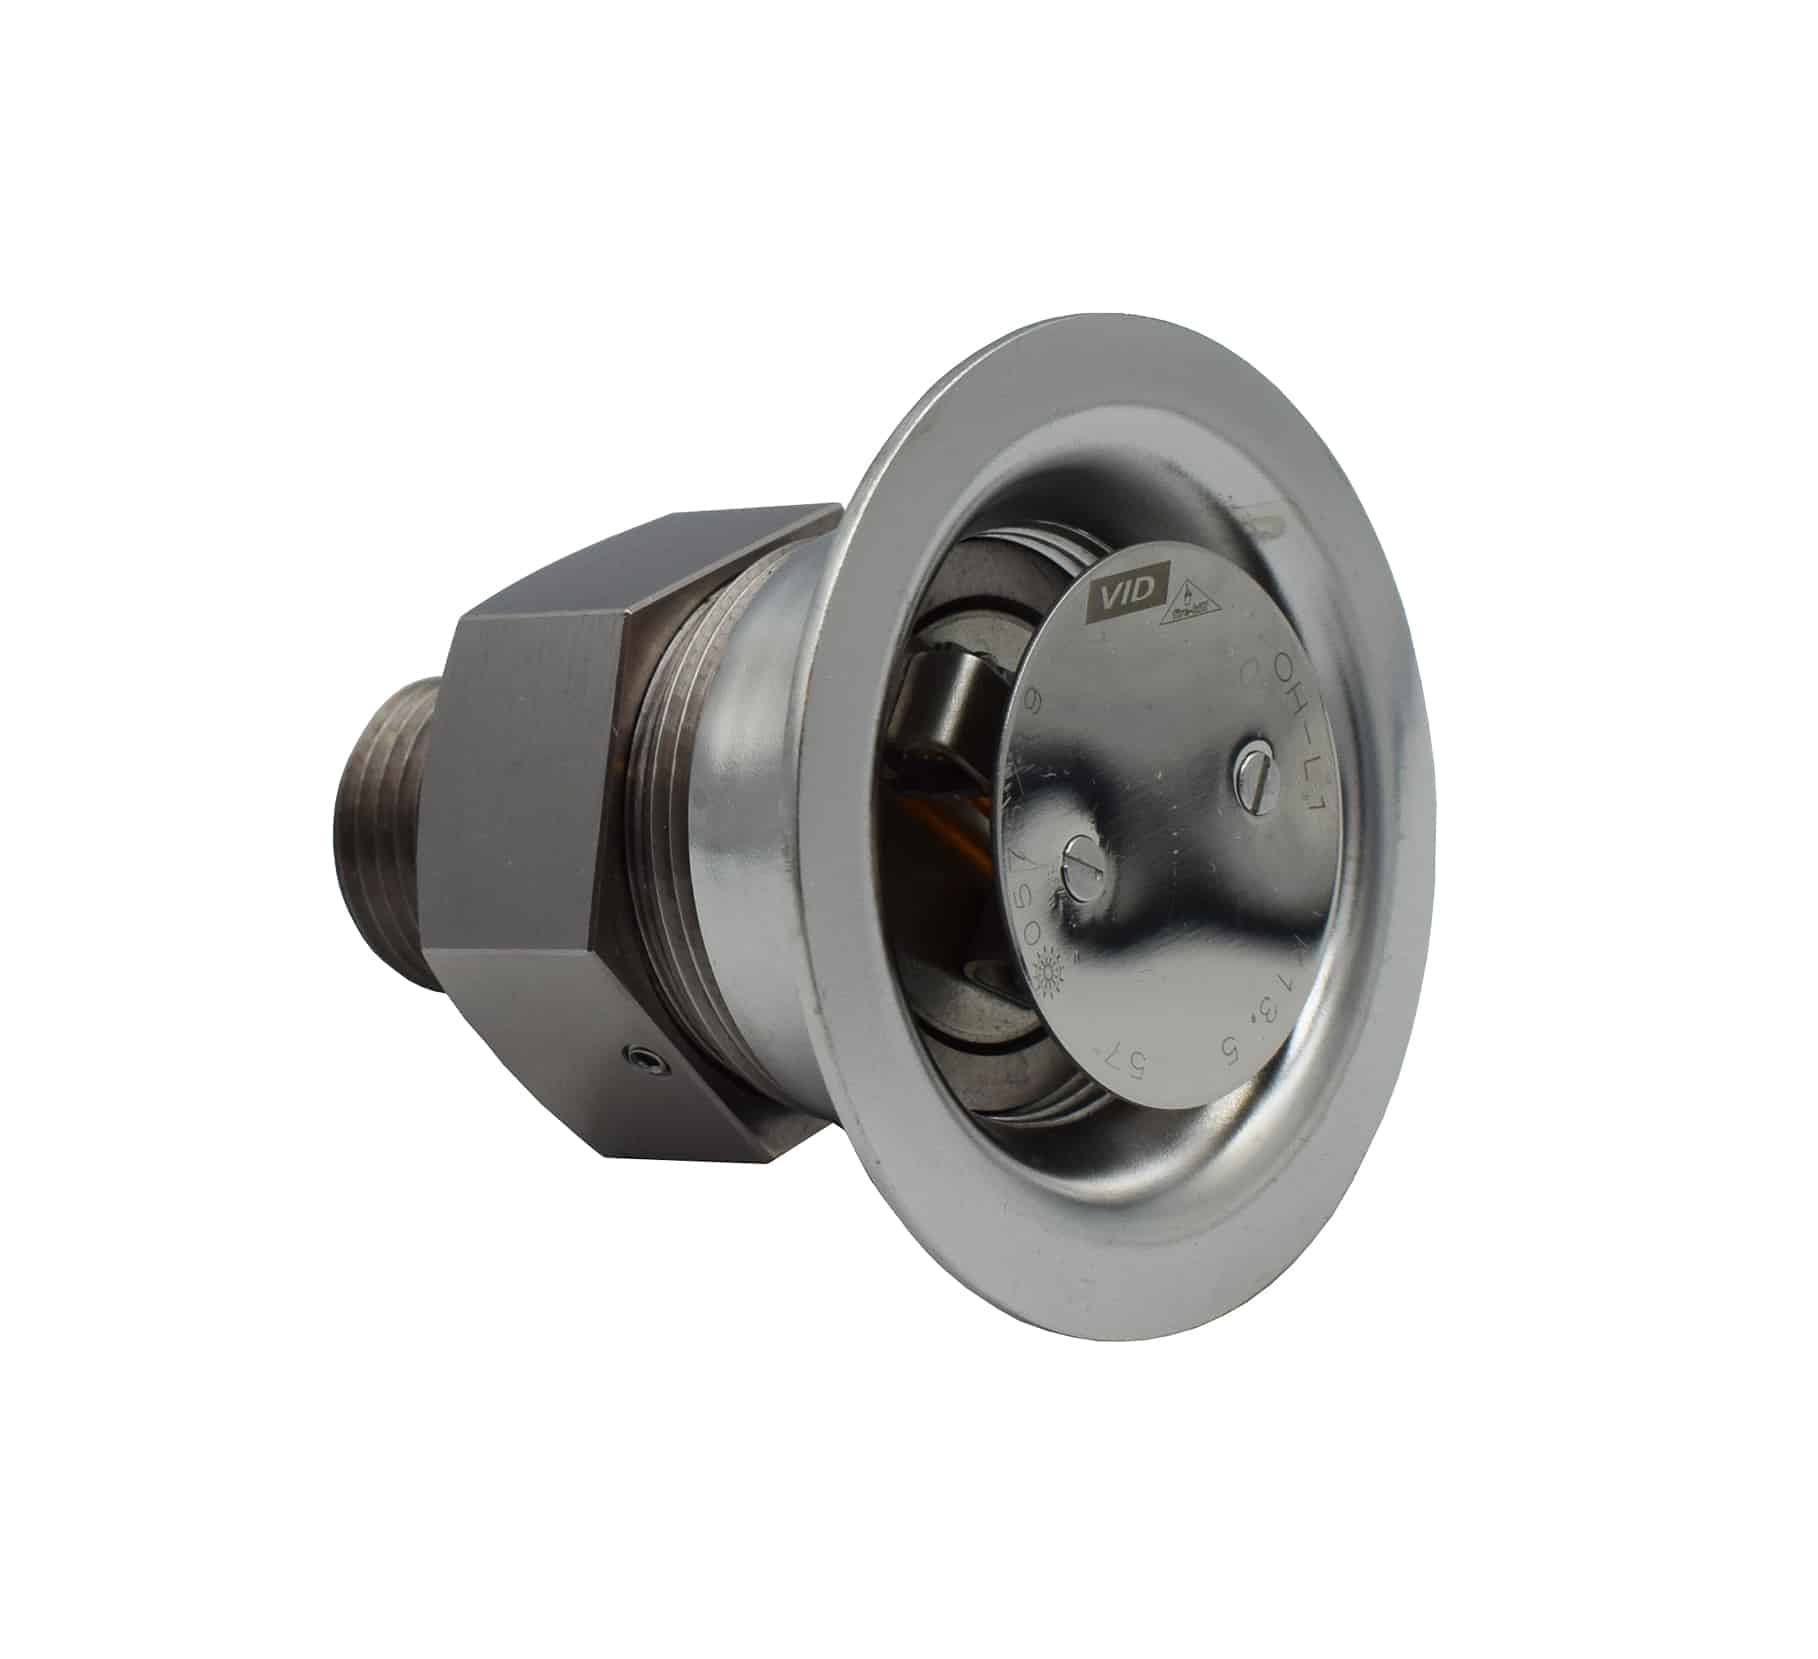 OH-SW4 Automatic sidewall nozzle